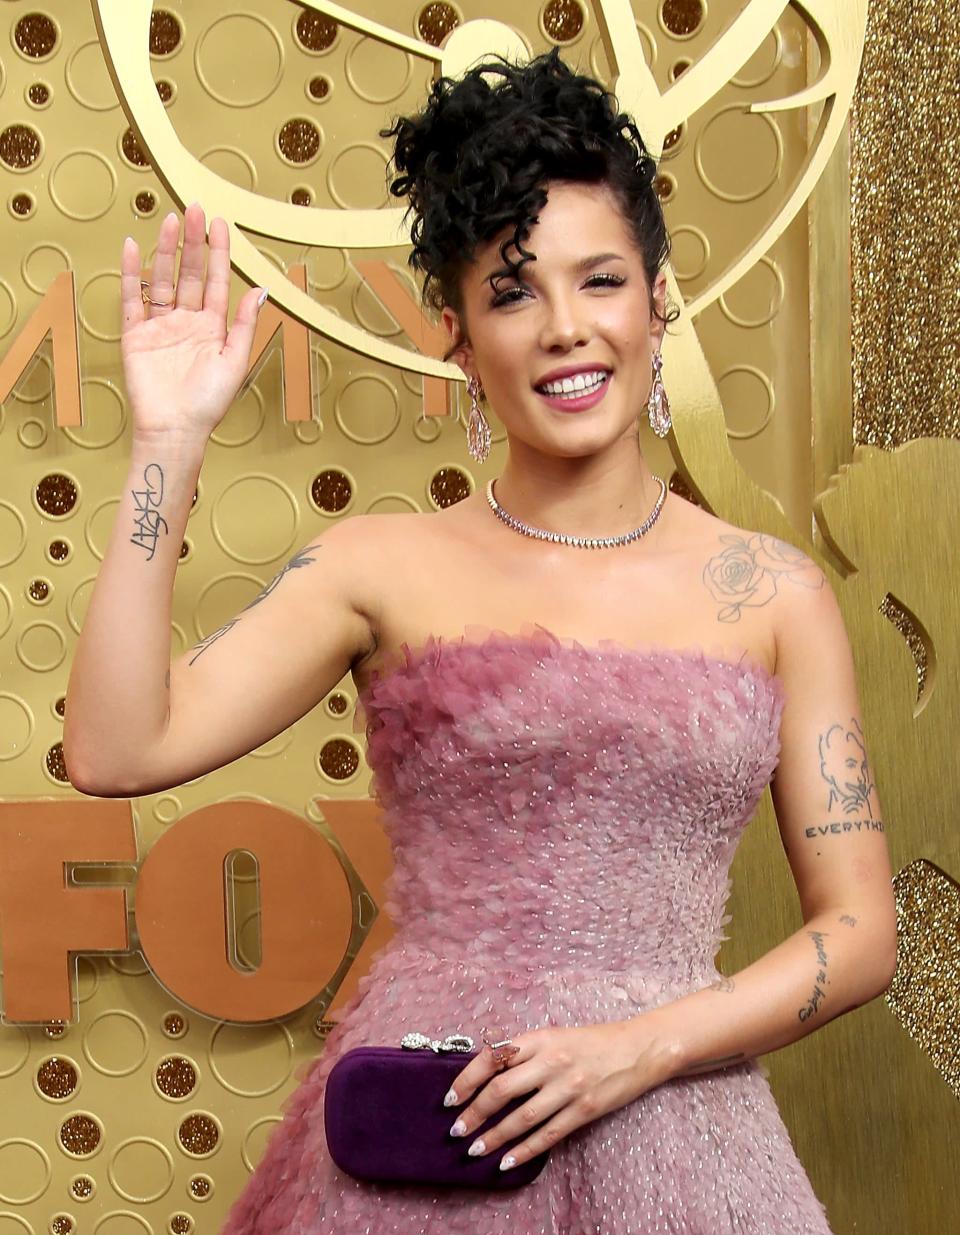 <p>The word "Brat" is written in cursive on Halsey's right arm. It's said to <a href="https://www.cosmopolitan.com/entertainment/celebs/g28869337/halsey-tattoos-meaning/?slide=10" class="link " rel="nofollow noopener" target="_blank" data-ylk="slk:refer to her teenage years">refer to her teenage years</a> and the nickname her parents gave her.</p>